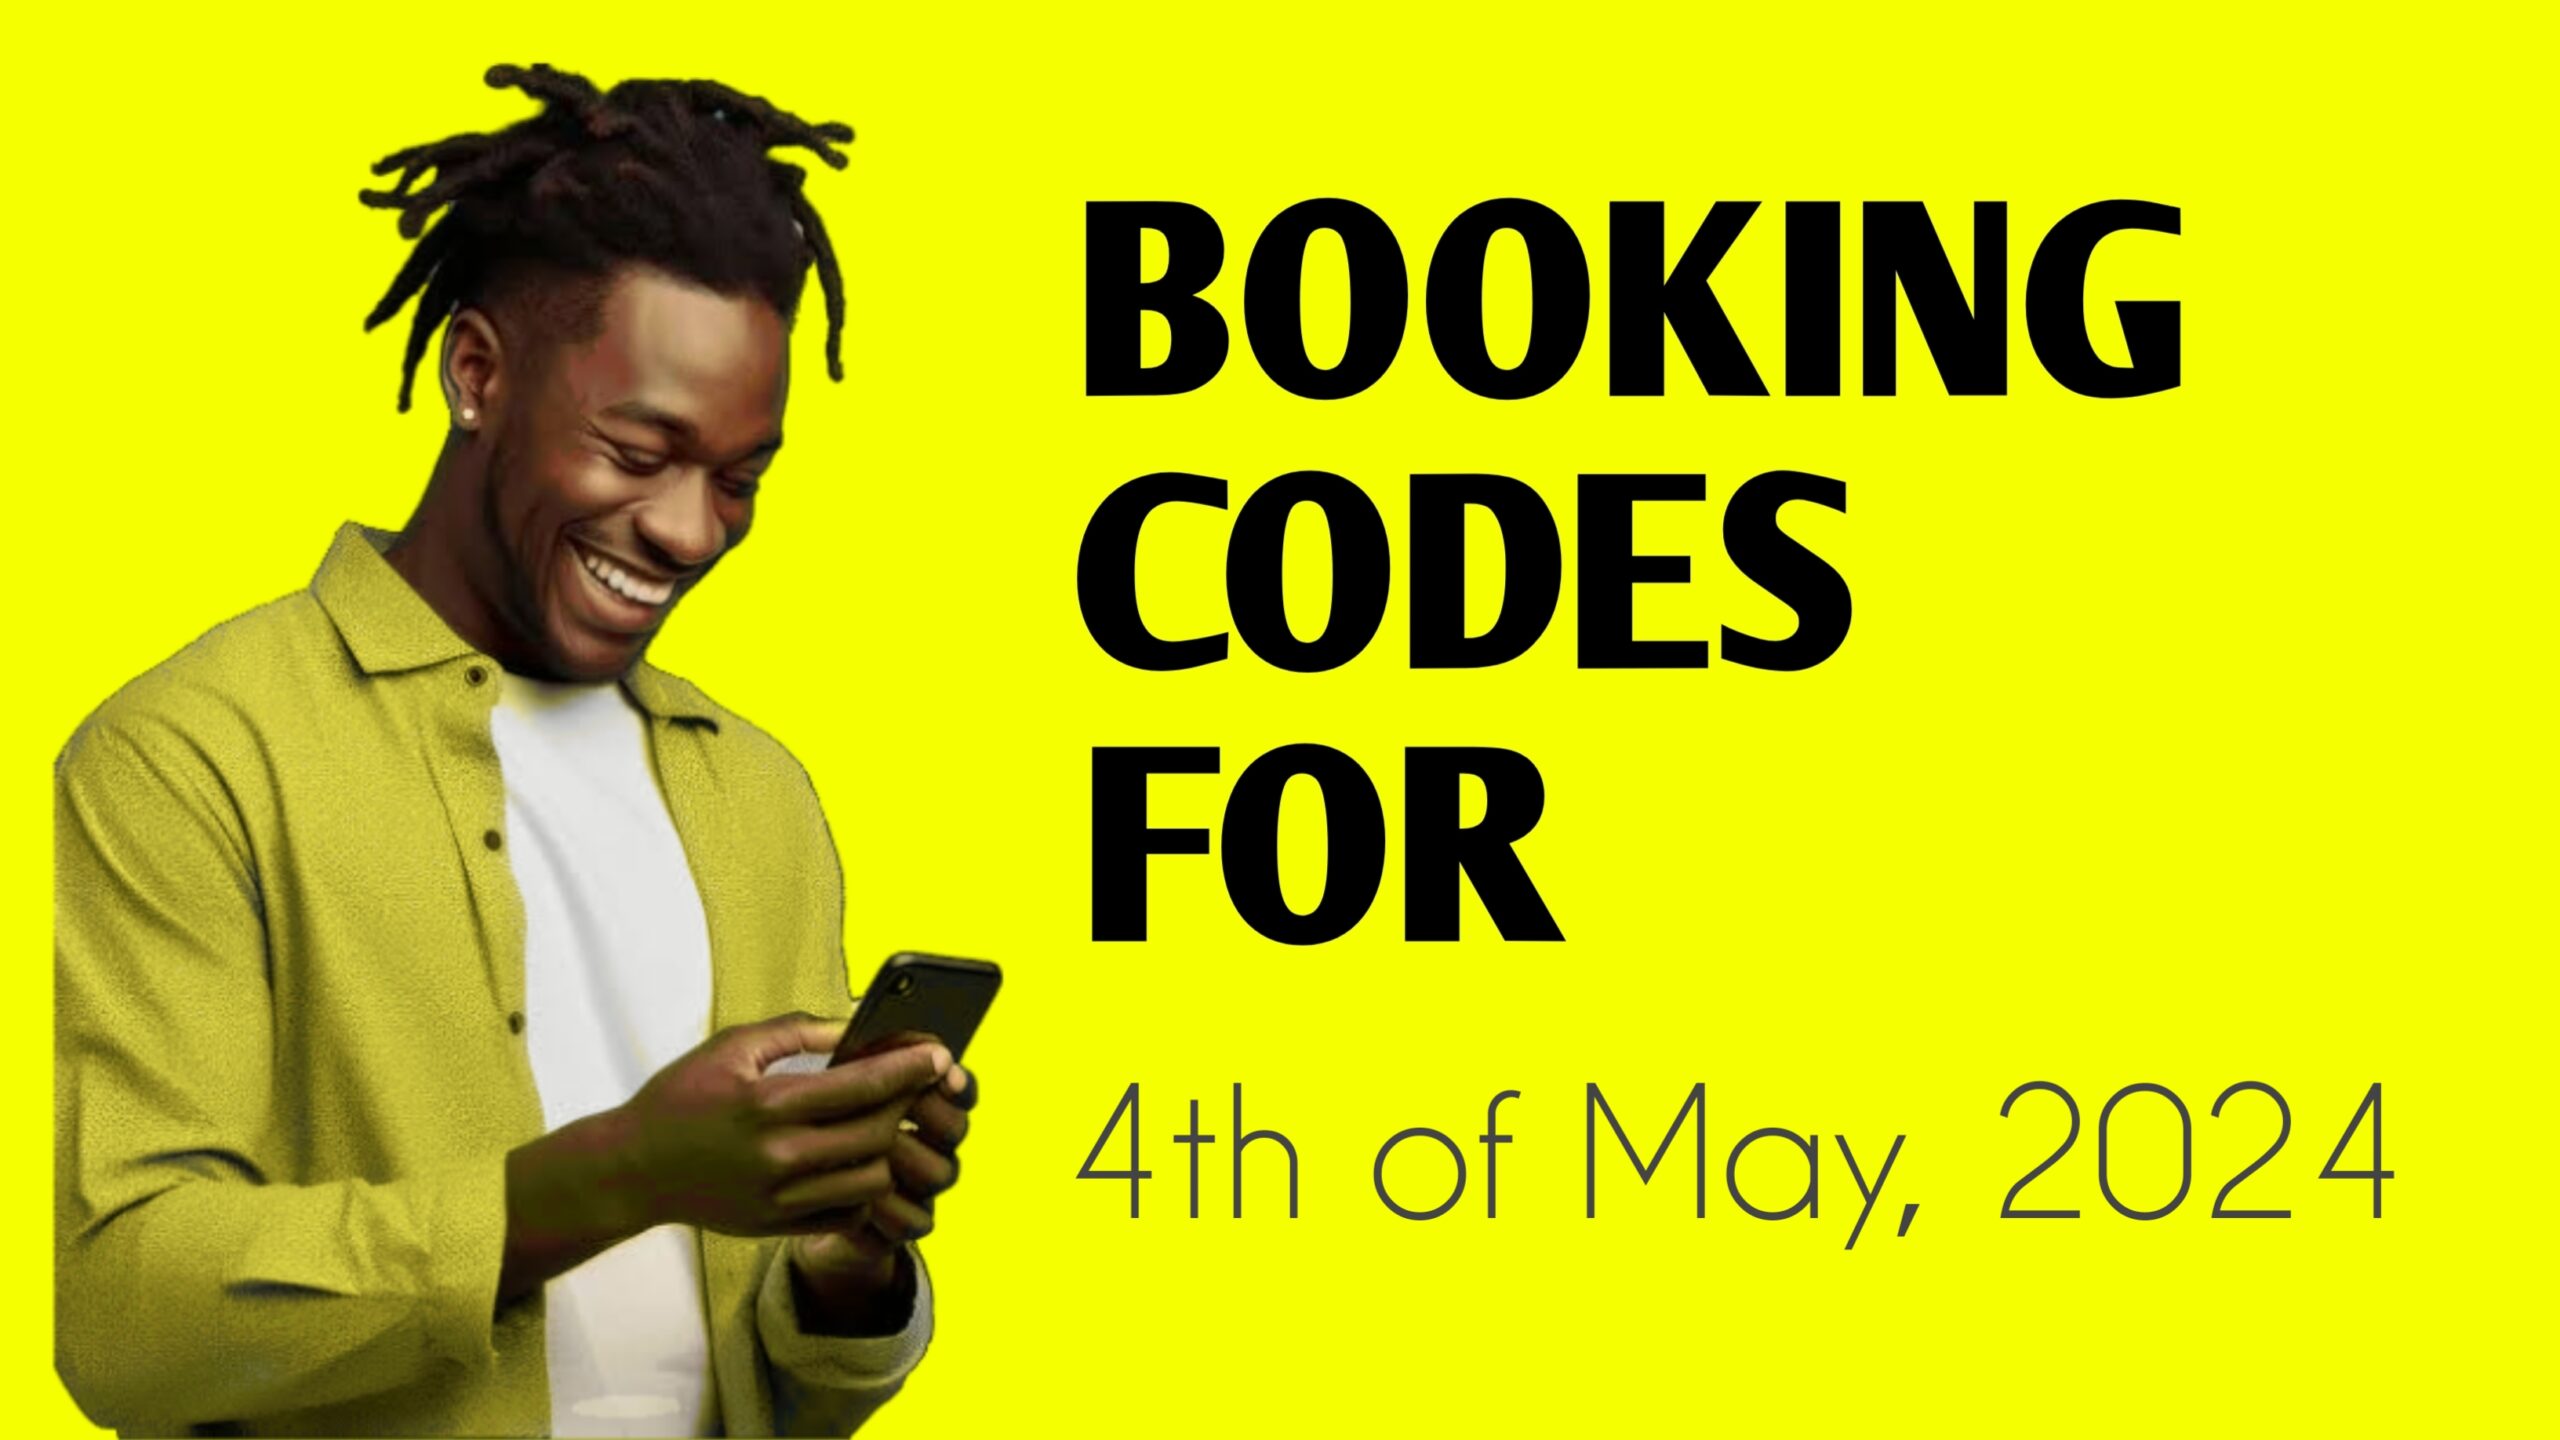 Booking Codes for 4th of May, 2024